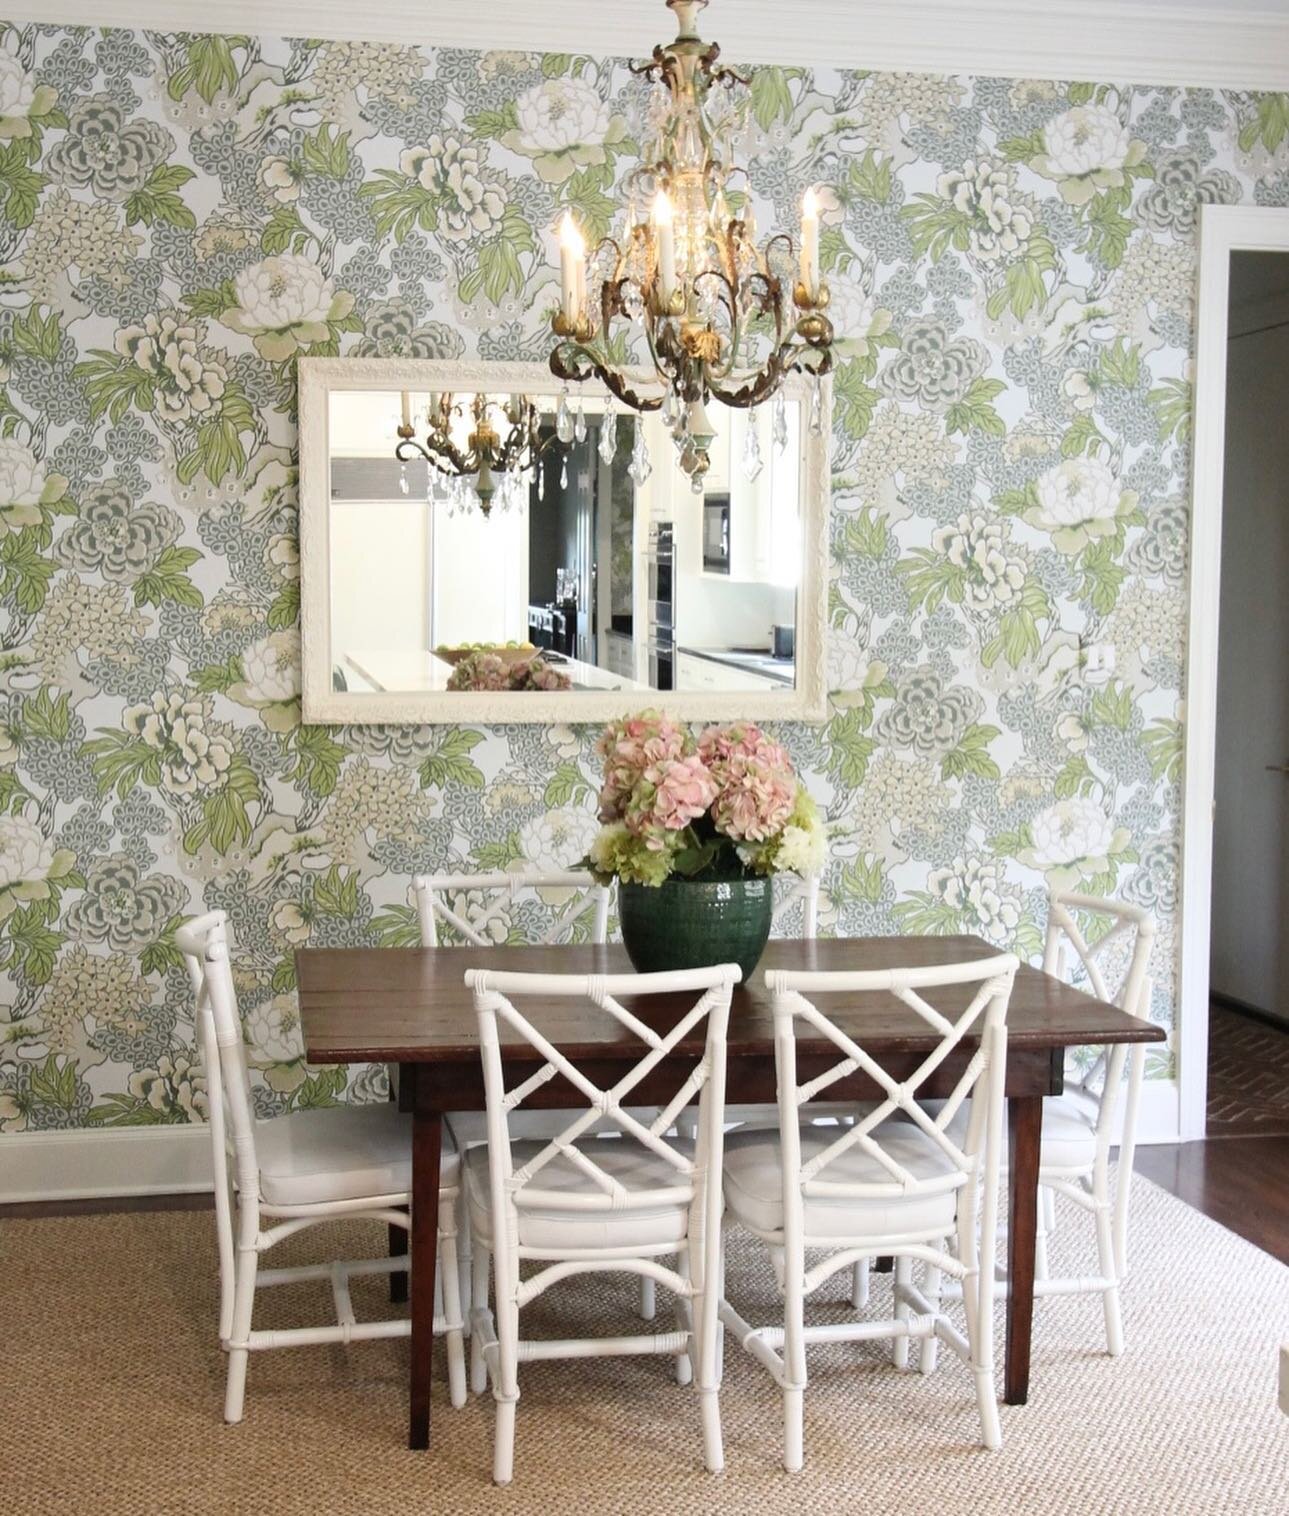 Spring has sprung in this charming breakfast room! 🌸 We&rsquo;re embracing this season with floral wallpaper, an elegant chandelier, and fresh blooms. 🌿 #kathebakerdesign
&bull;
&bull;
&bull;
#interiordesign #houstondesign #designdetails #homedesig